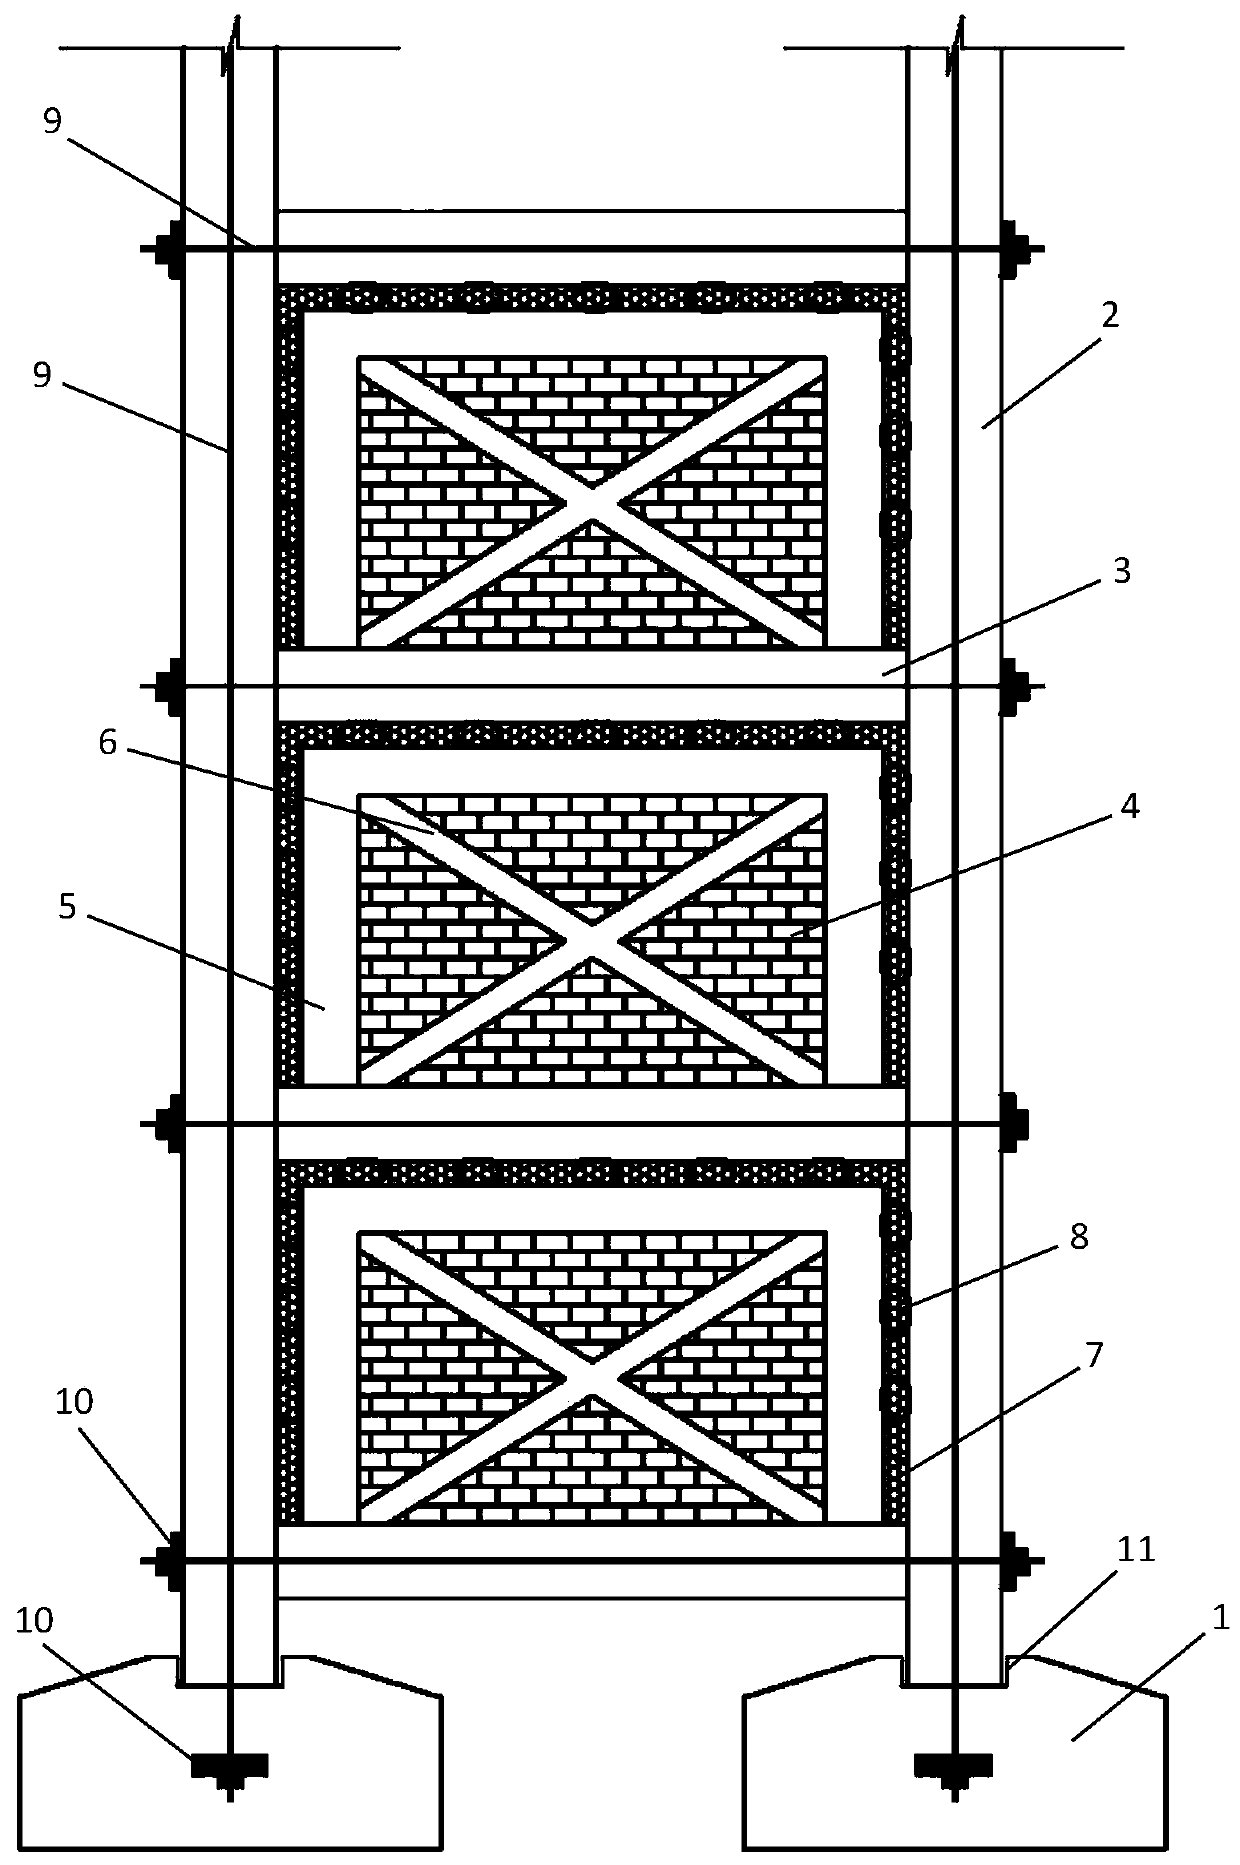 Self-reset frame-energy dissipating connecting filling wall structure